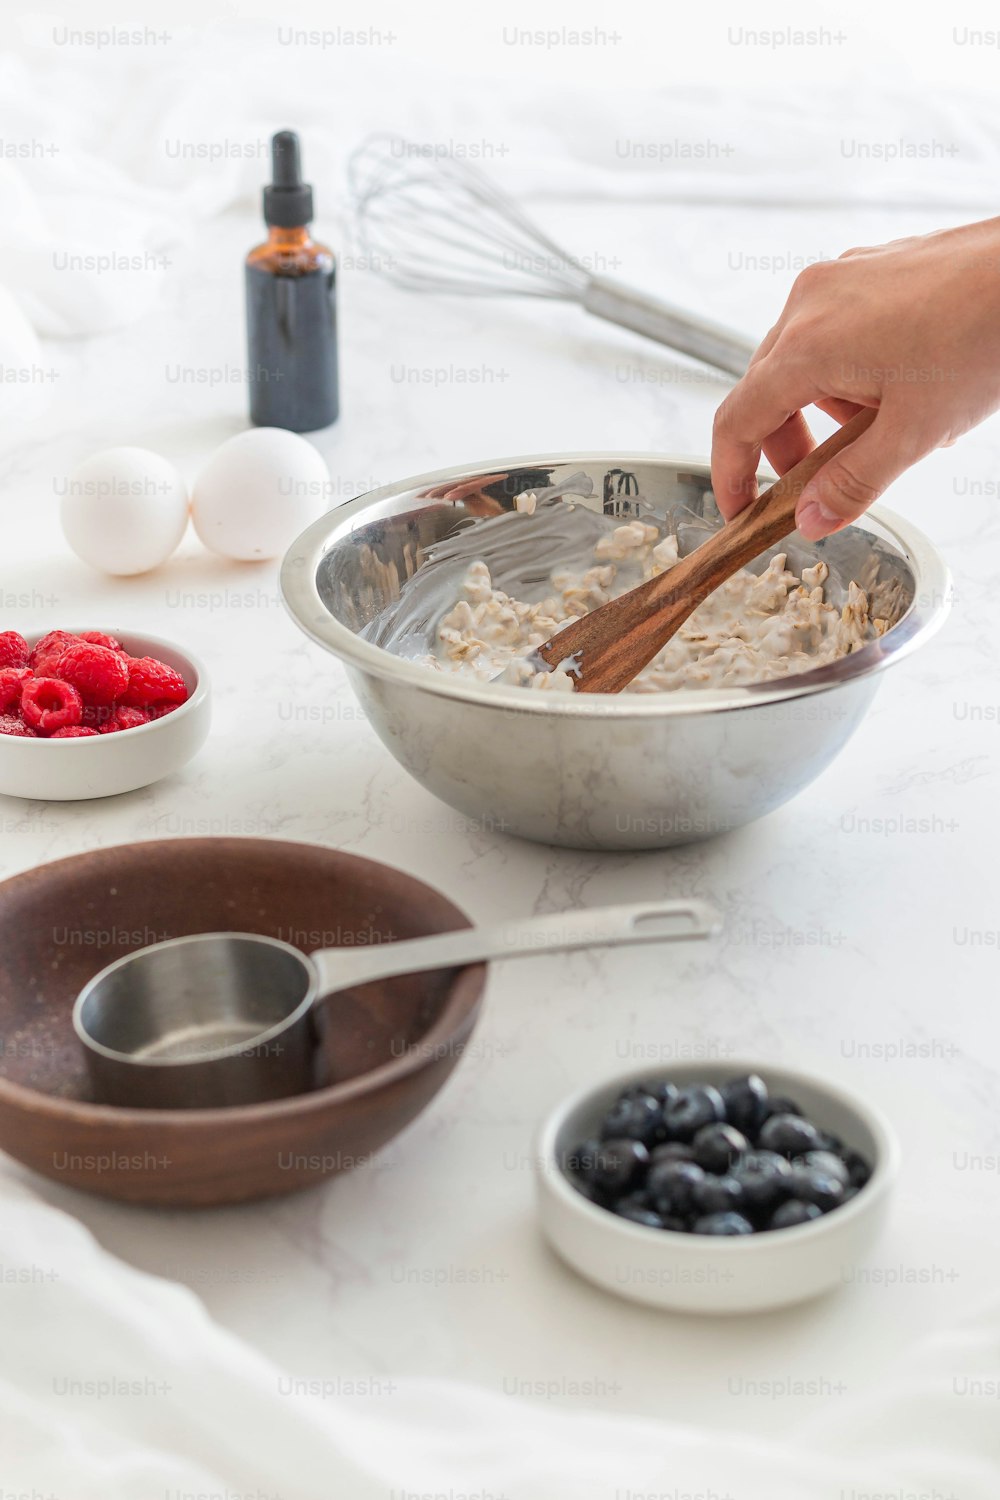 a bowl of oatmeal with berries and a whisk